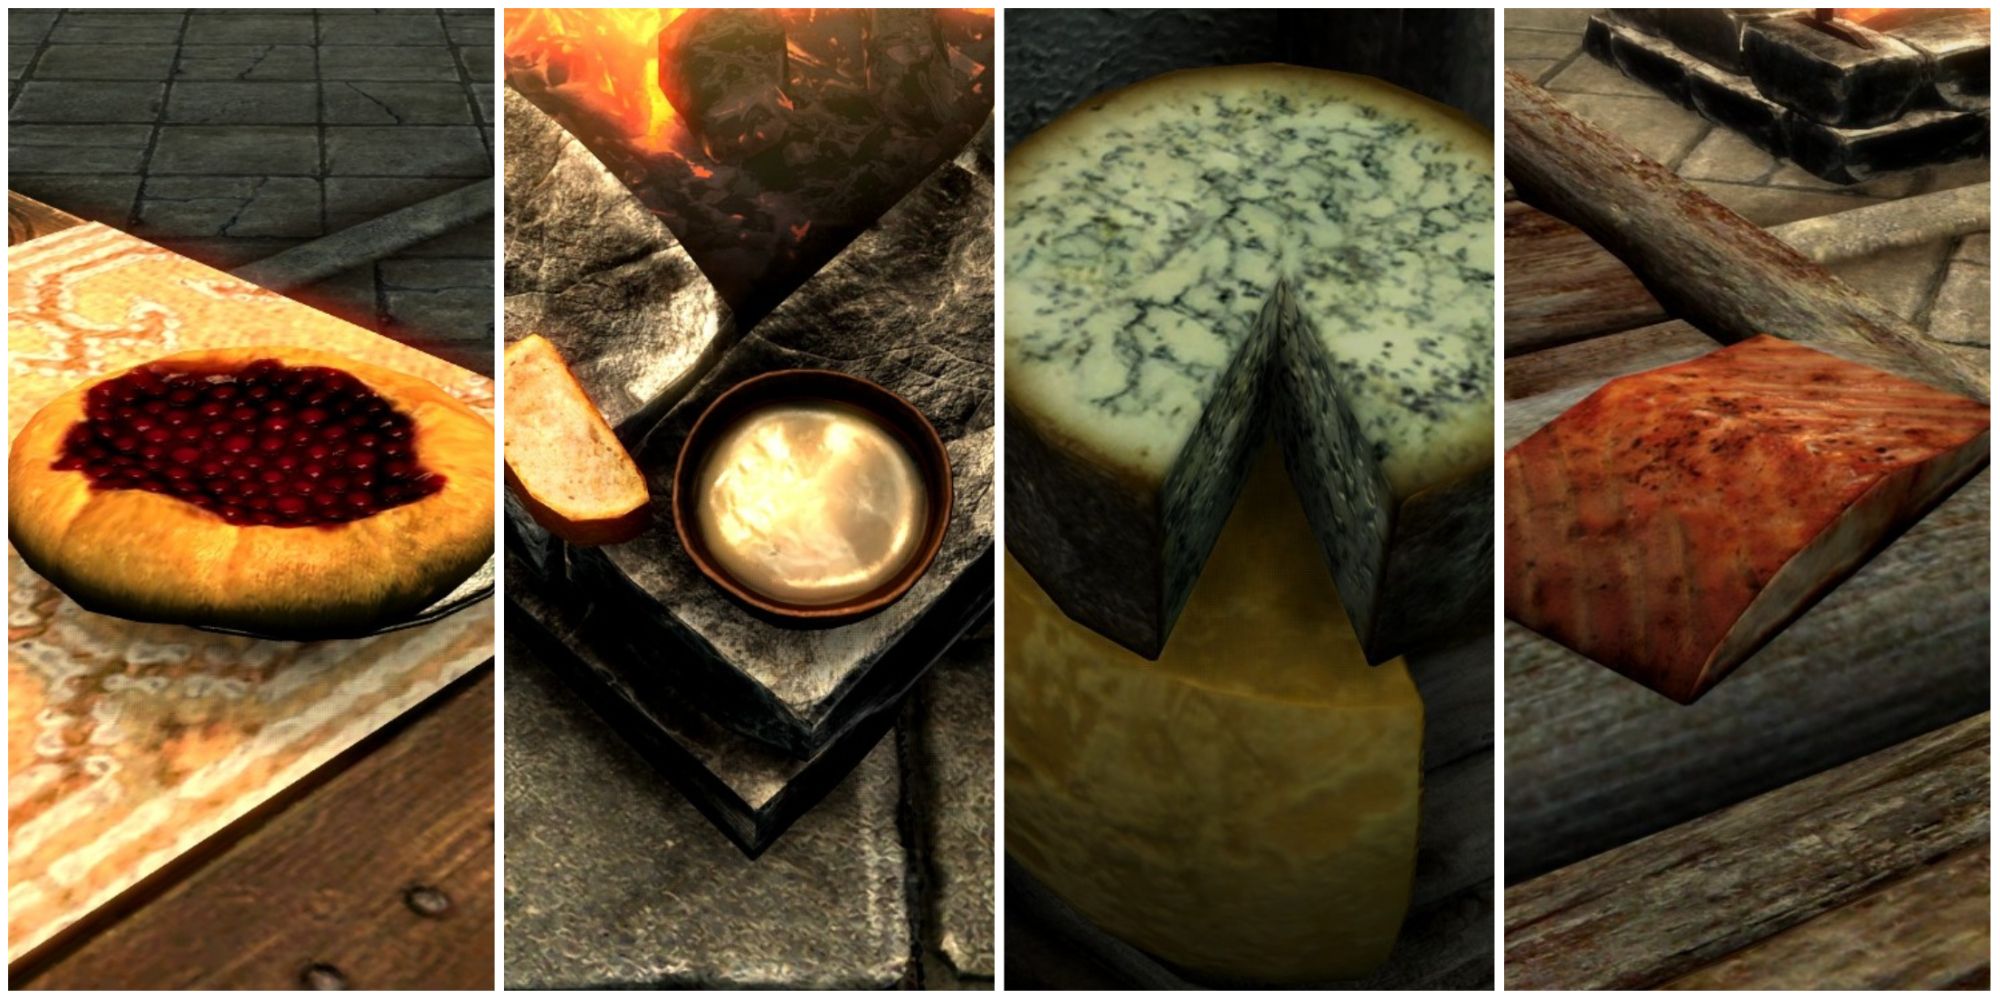 Skyrim collage of a snowberry crostata, elsweyr fondue, cheeses, and salmon steak.